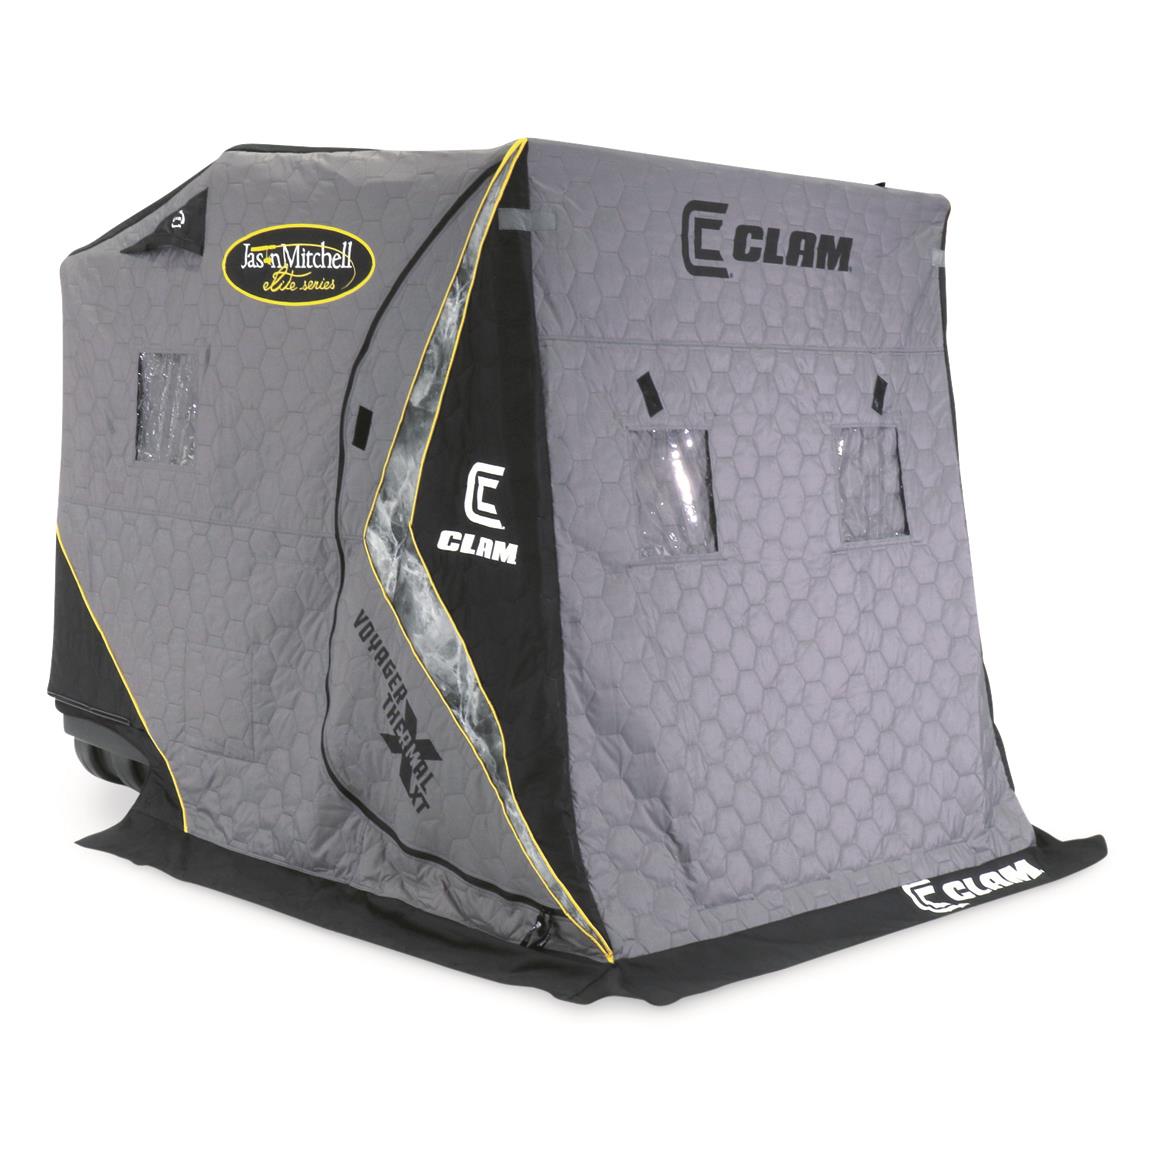 Clam Jason Mitchell Thermal XT Ice Fishing Shelter, 2-Person